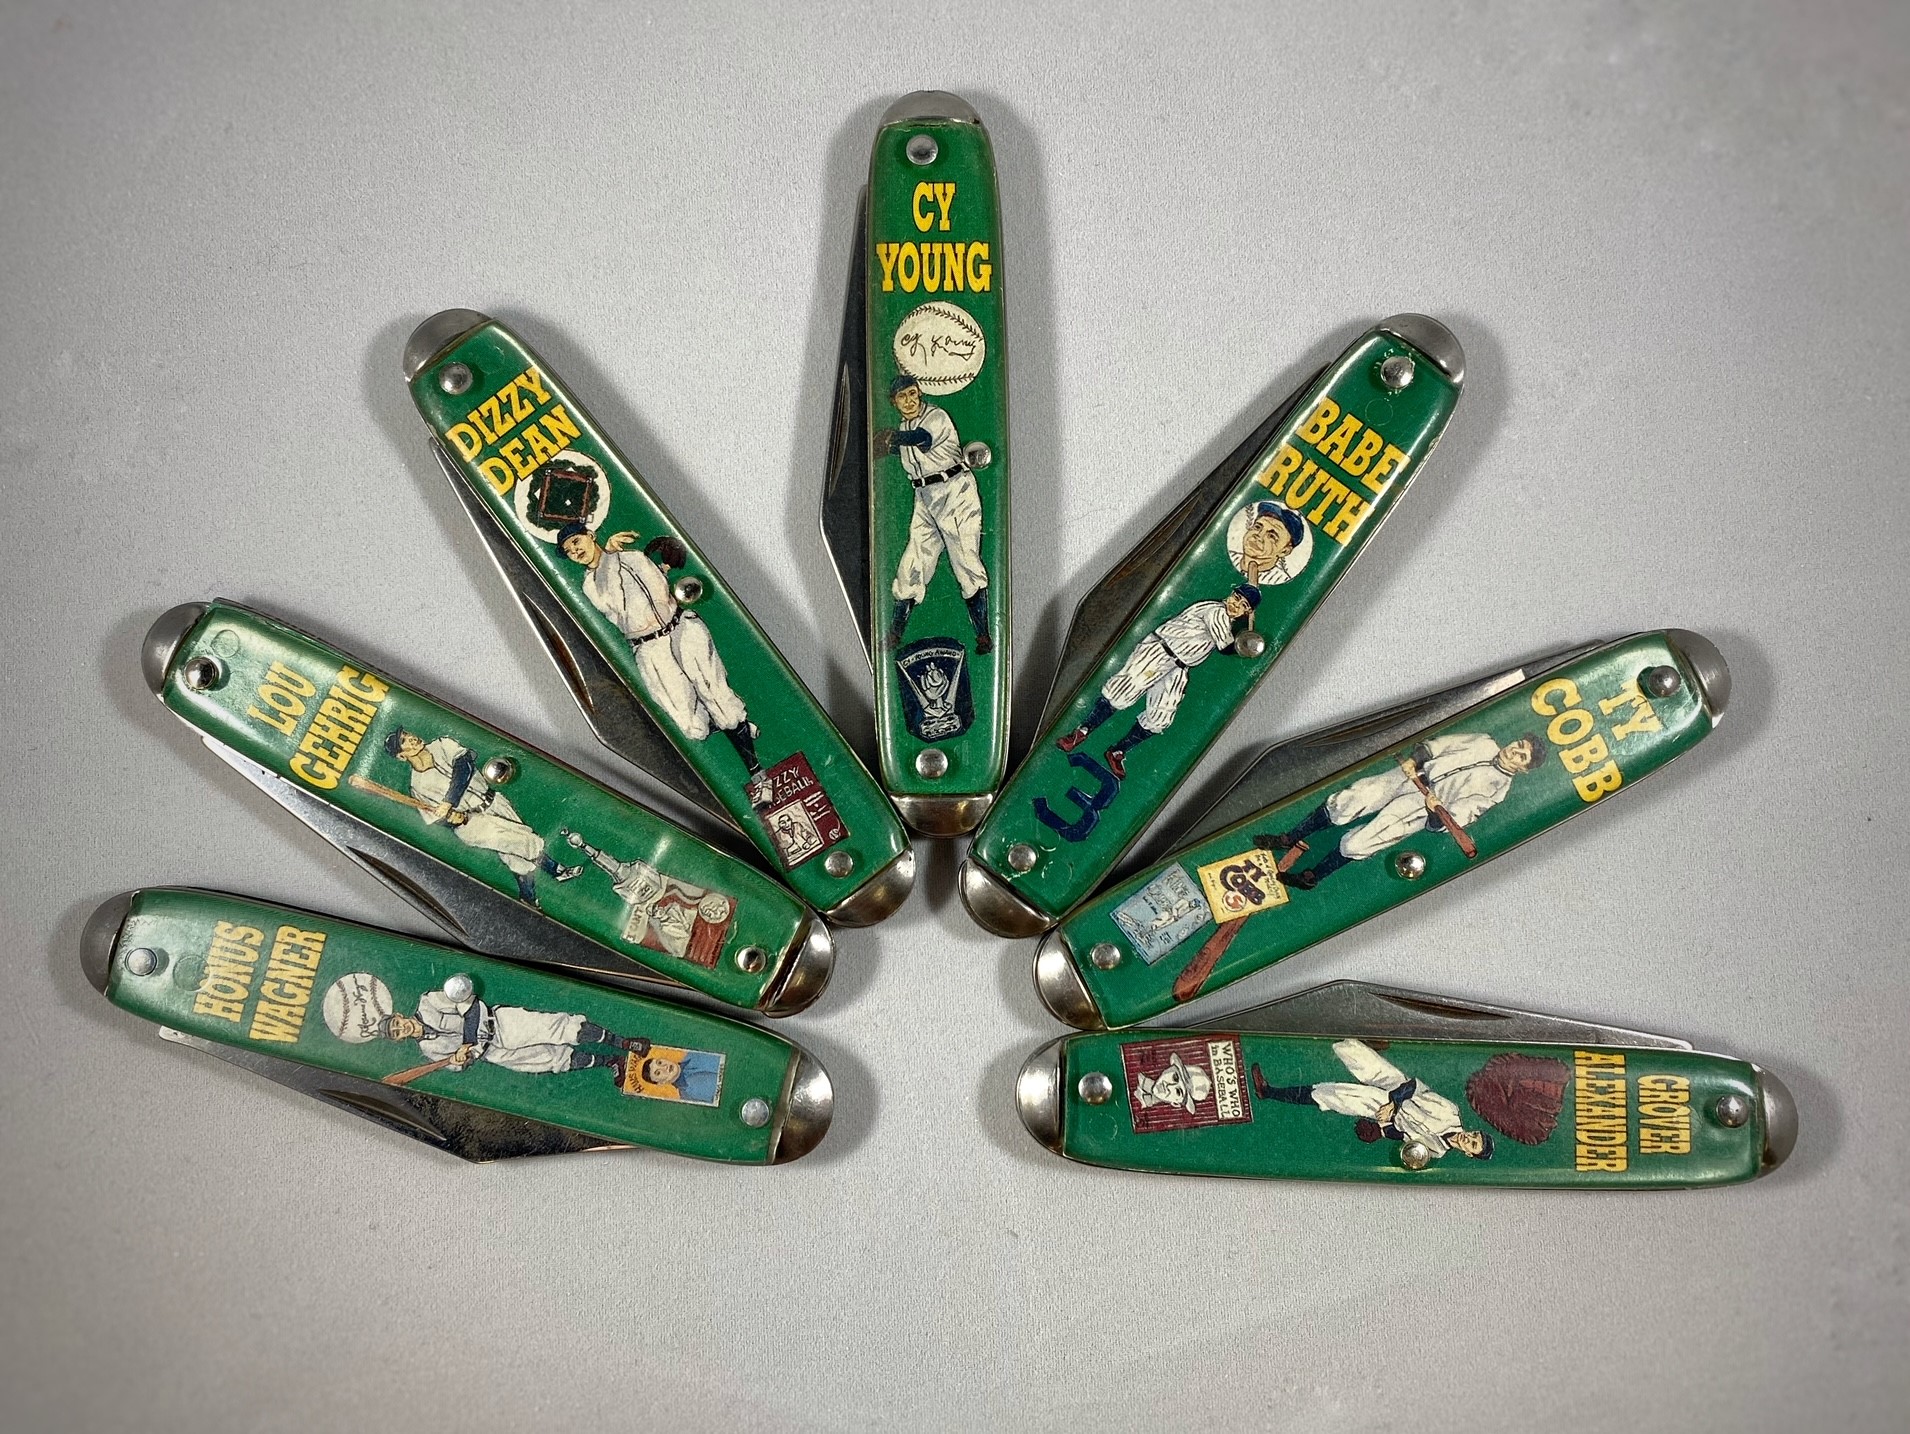 Lot 317: Vintage Novelty Knife Company Baseball-Themed Pocket Knives: Cy Young, Ty Cobb, Lou Gehrig, Grover Alexander, Babe Ruth, Honus Wagner, Dizzy Dean